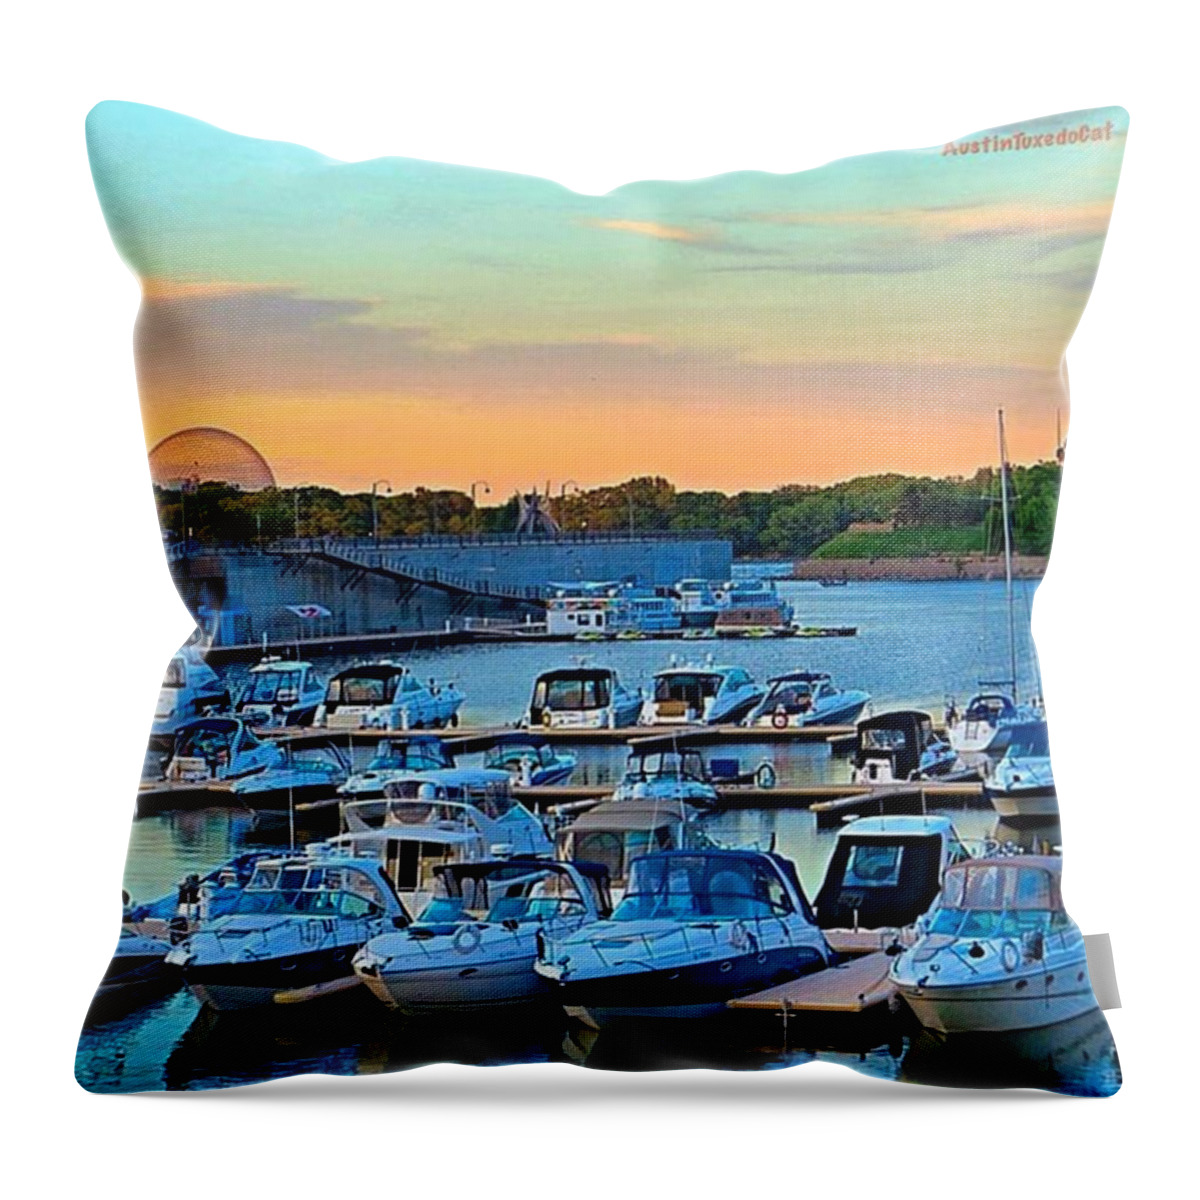 Sunrise_and_sunsets Throw Pillow featuring the photograph Early #evening At The Old #port Of by Austin Tuxedo Cat